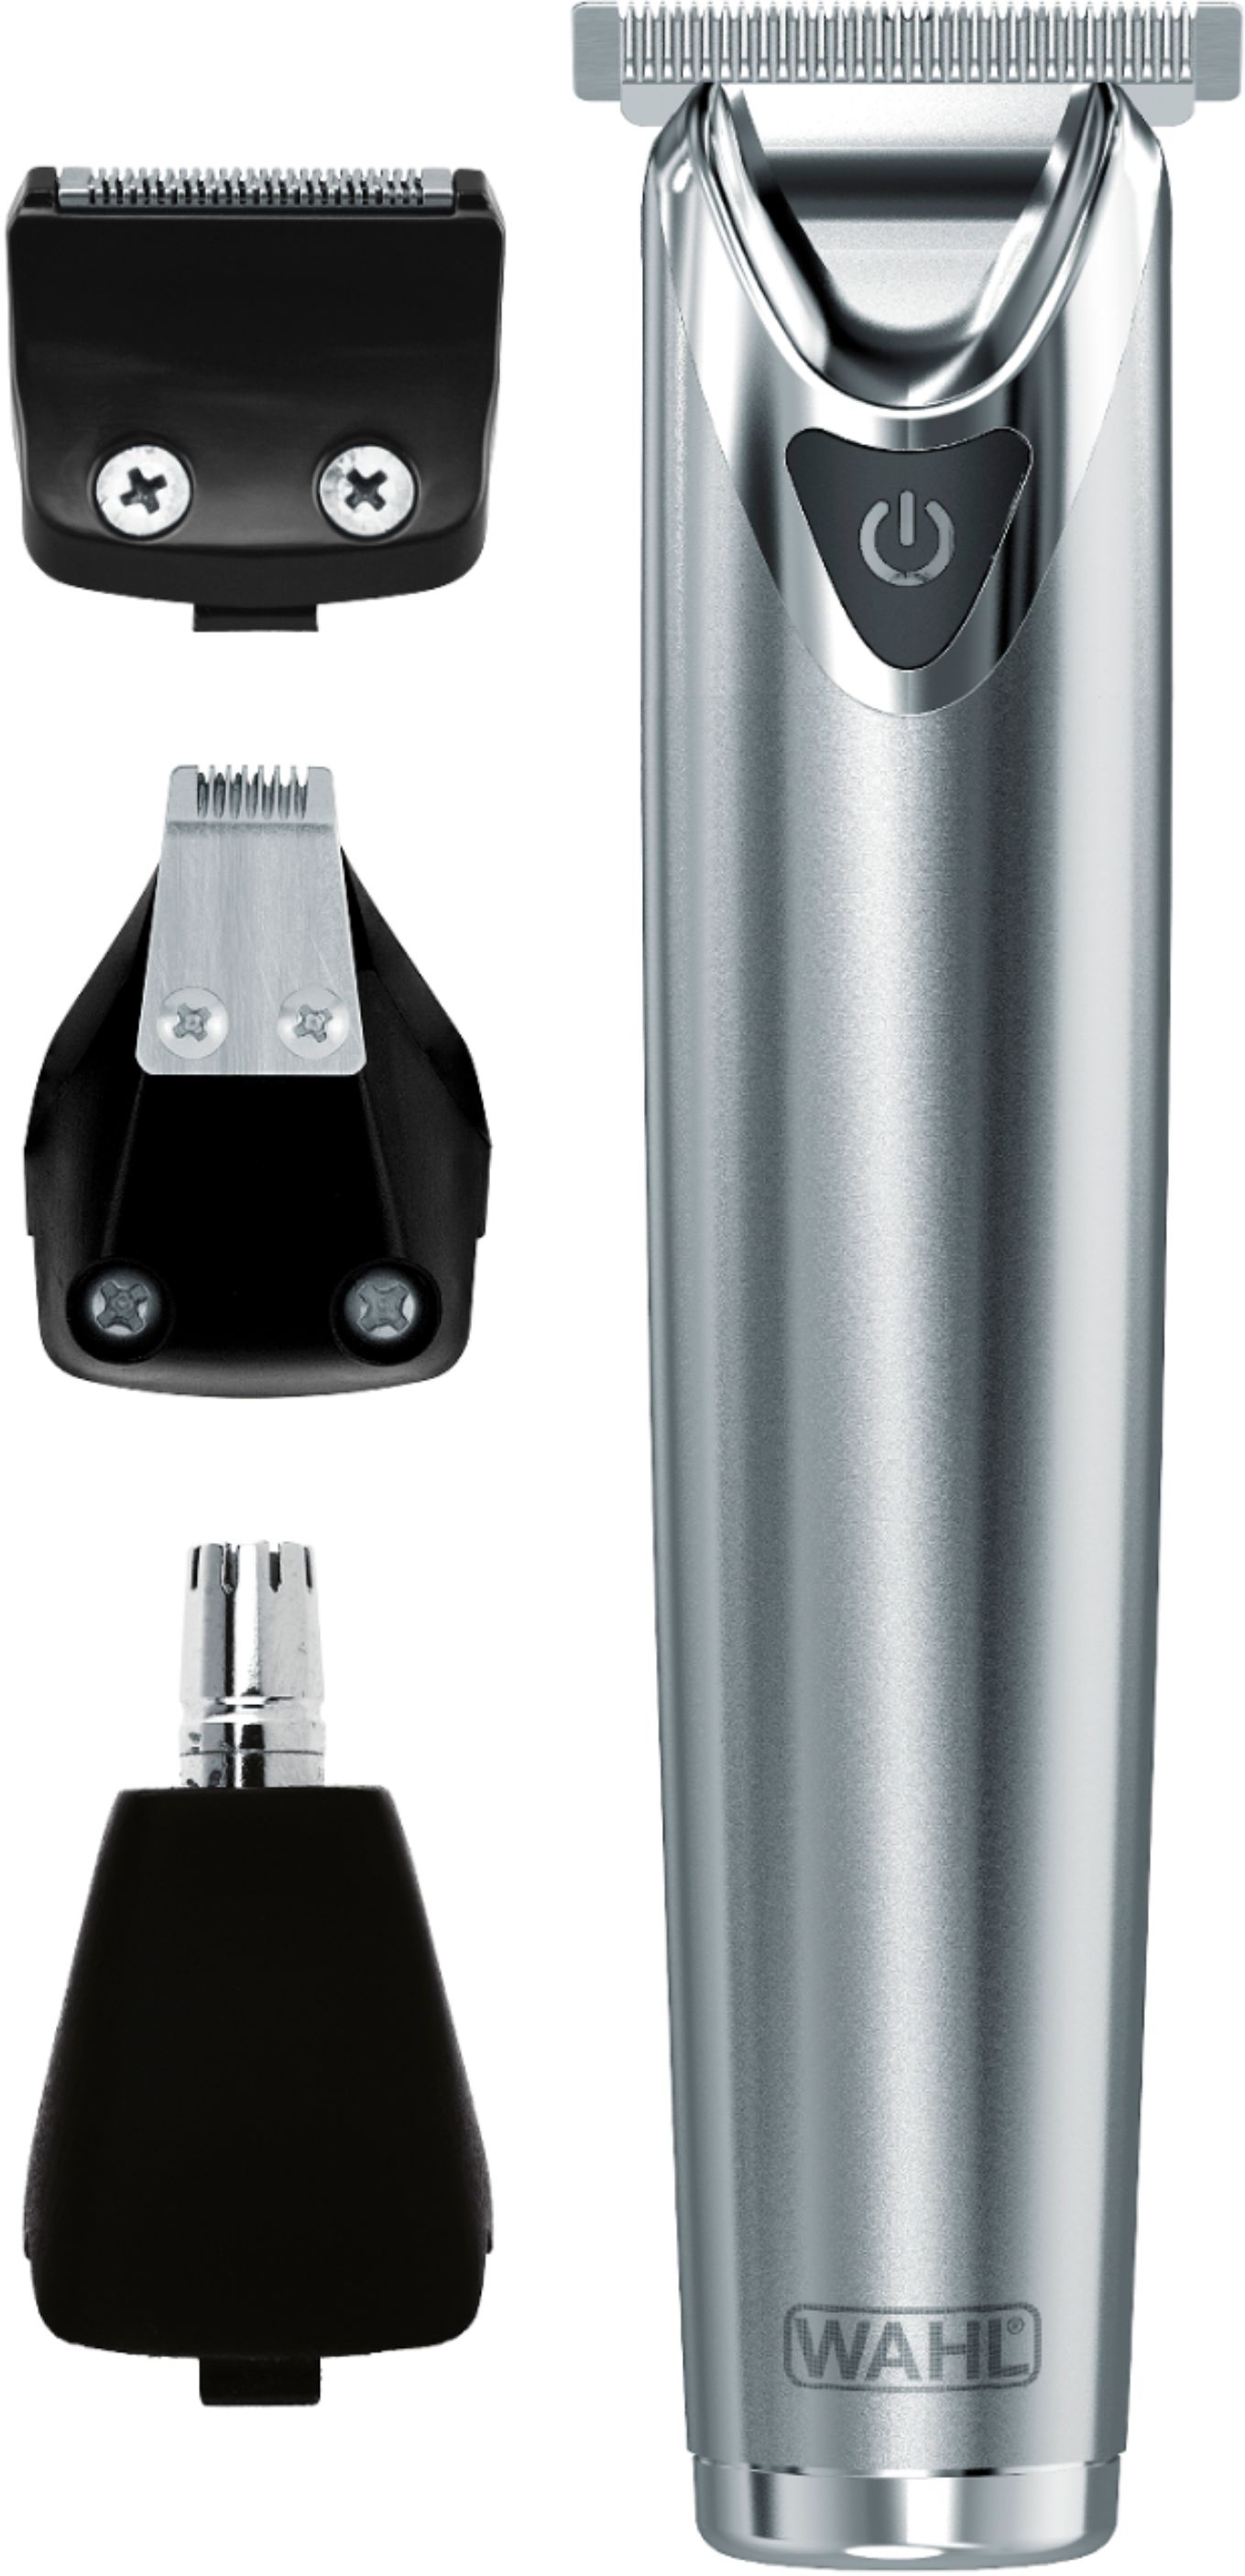 Wahl Lithium Ion +™ Beard Trimmer Stainless Steel 09818-5001 - Best Buy Wahl Trimmer Stainless Steel Lithium Ion